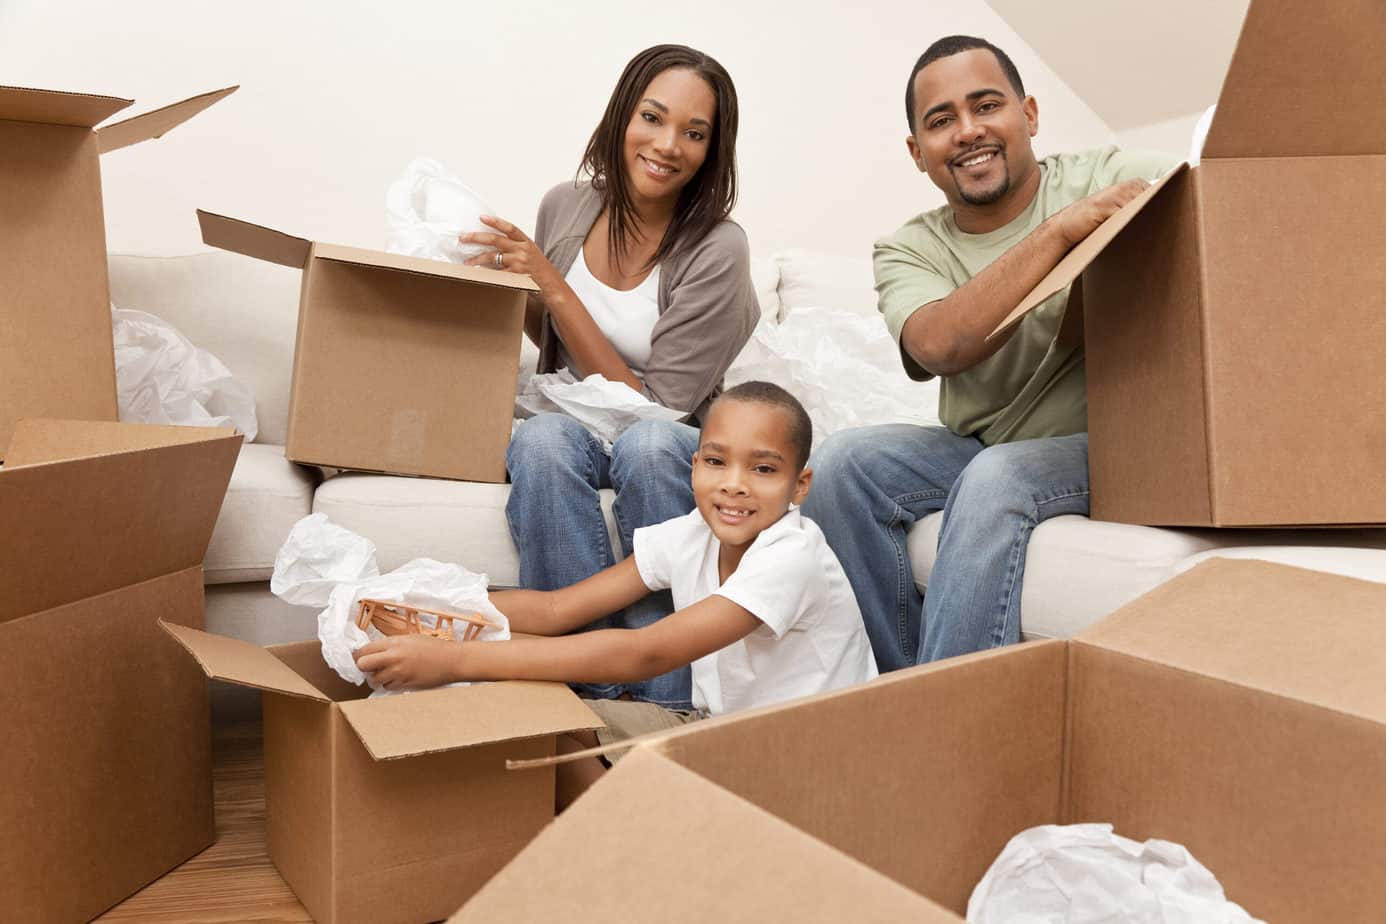 You are currently viewing How to Make Buying and Moving into a New Home Go Smoothly